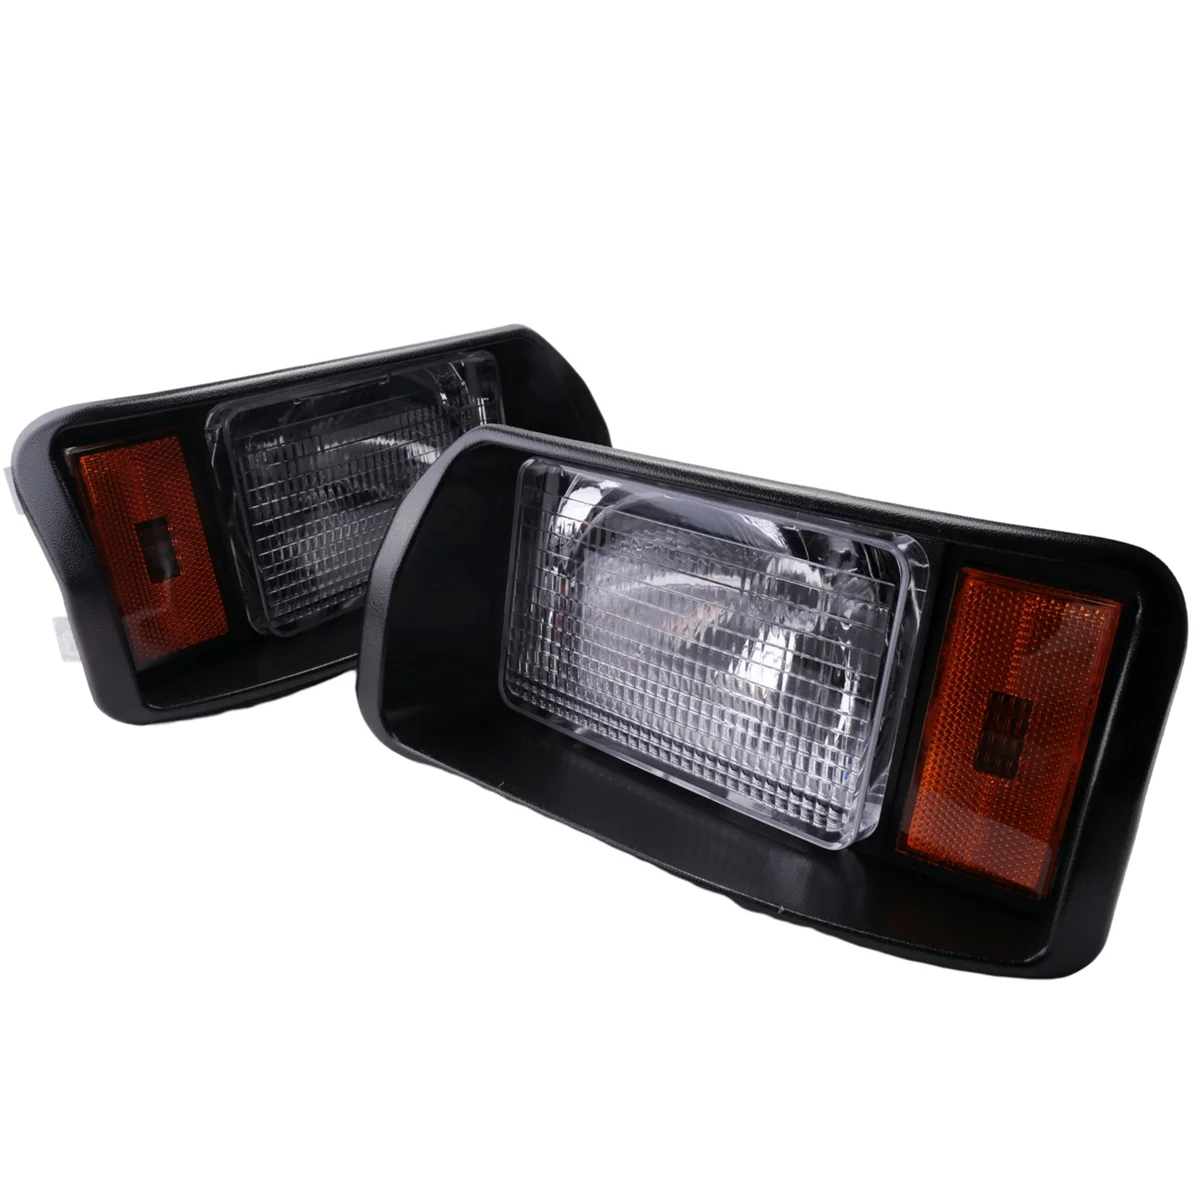 

Golf Cart Headlights Club Car Style Light Factory Size Lights for DS,Suit(Left and Right)